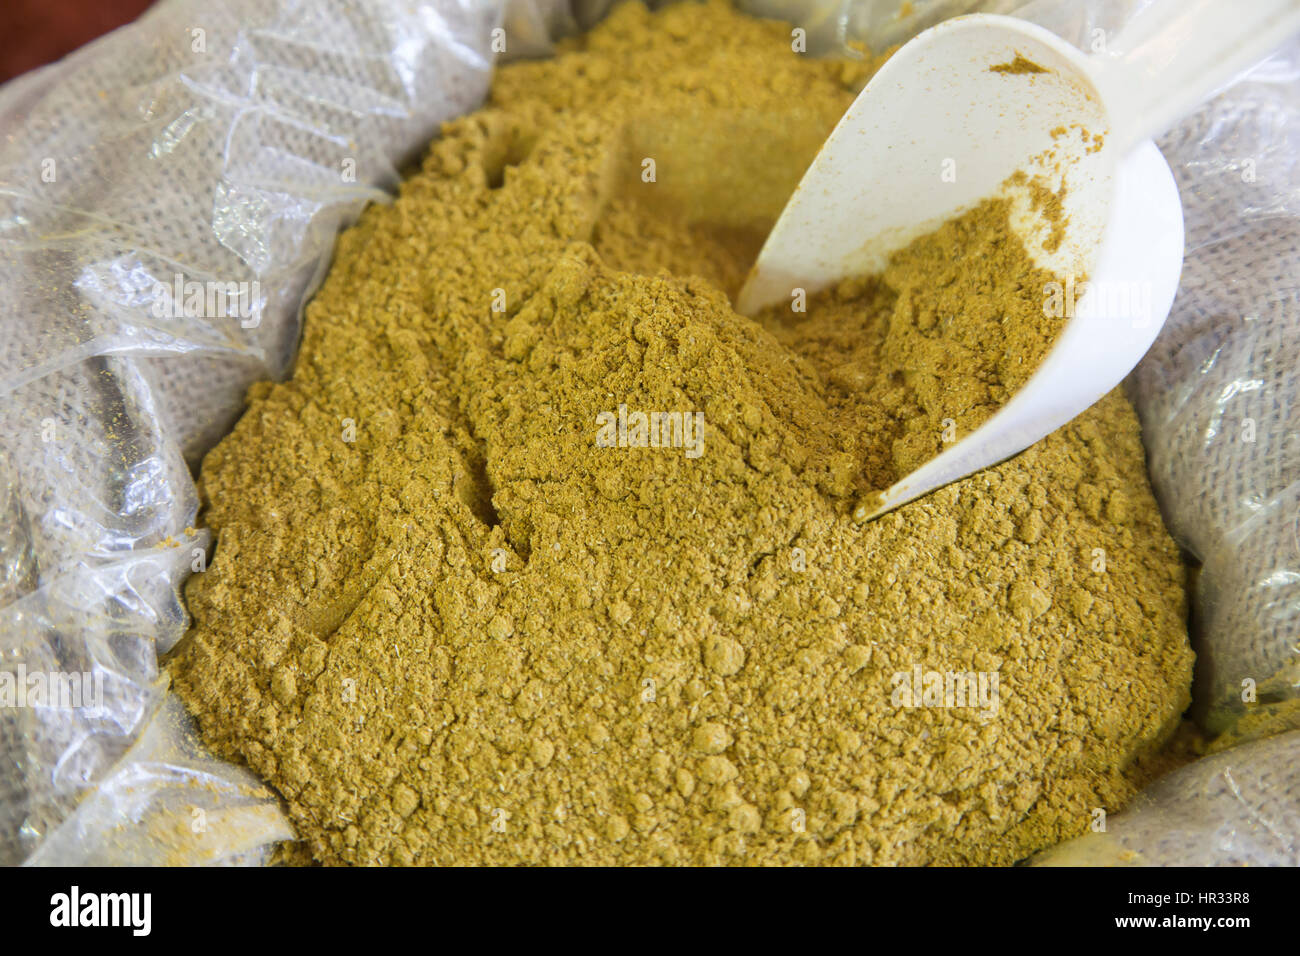 Curry,curry powder is a spice mix of widely varying composition based on South Asian cuisine. Stock Photo